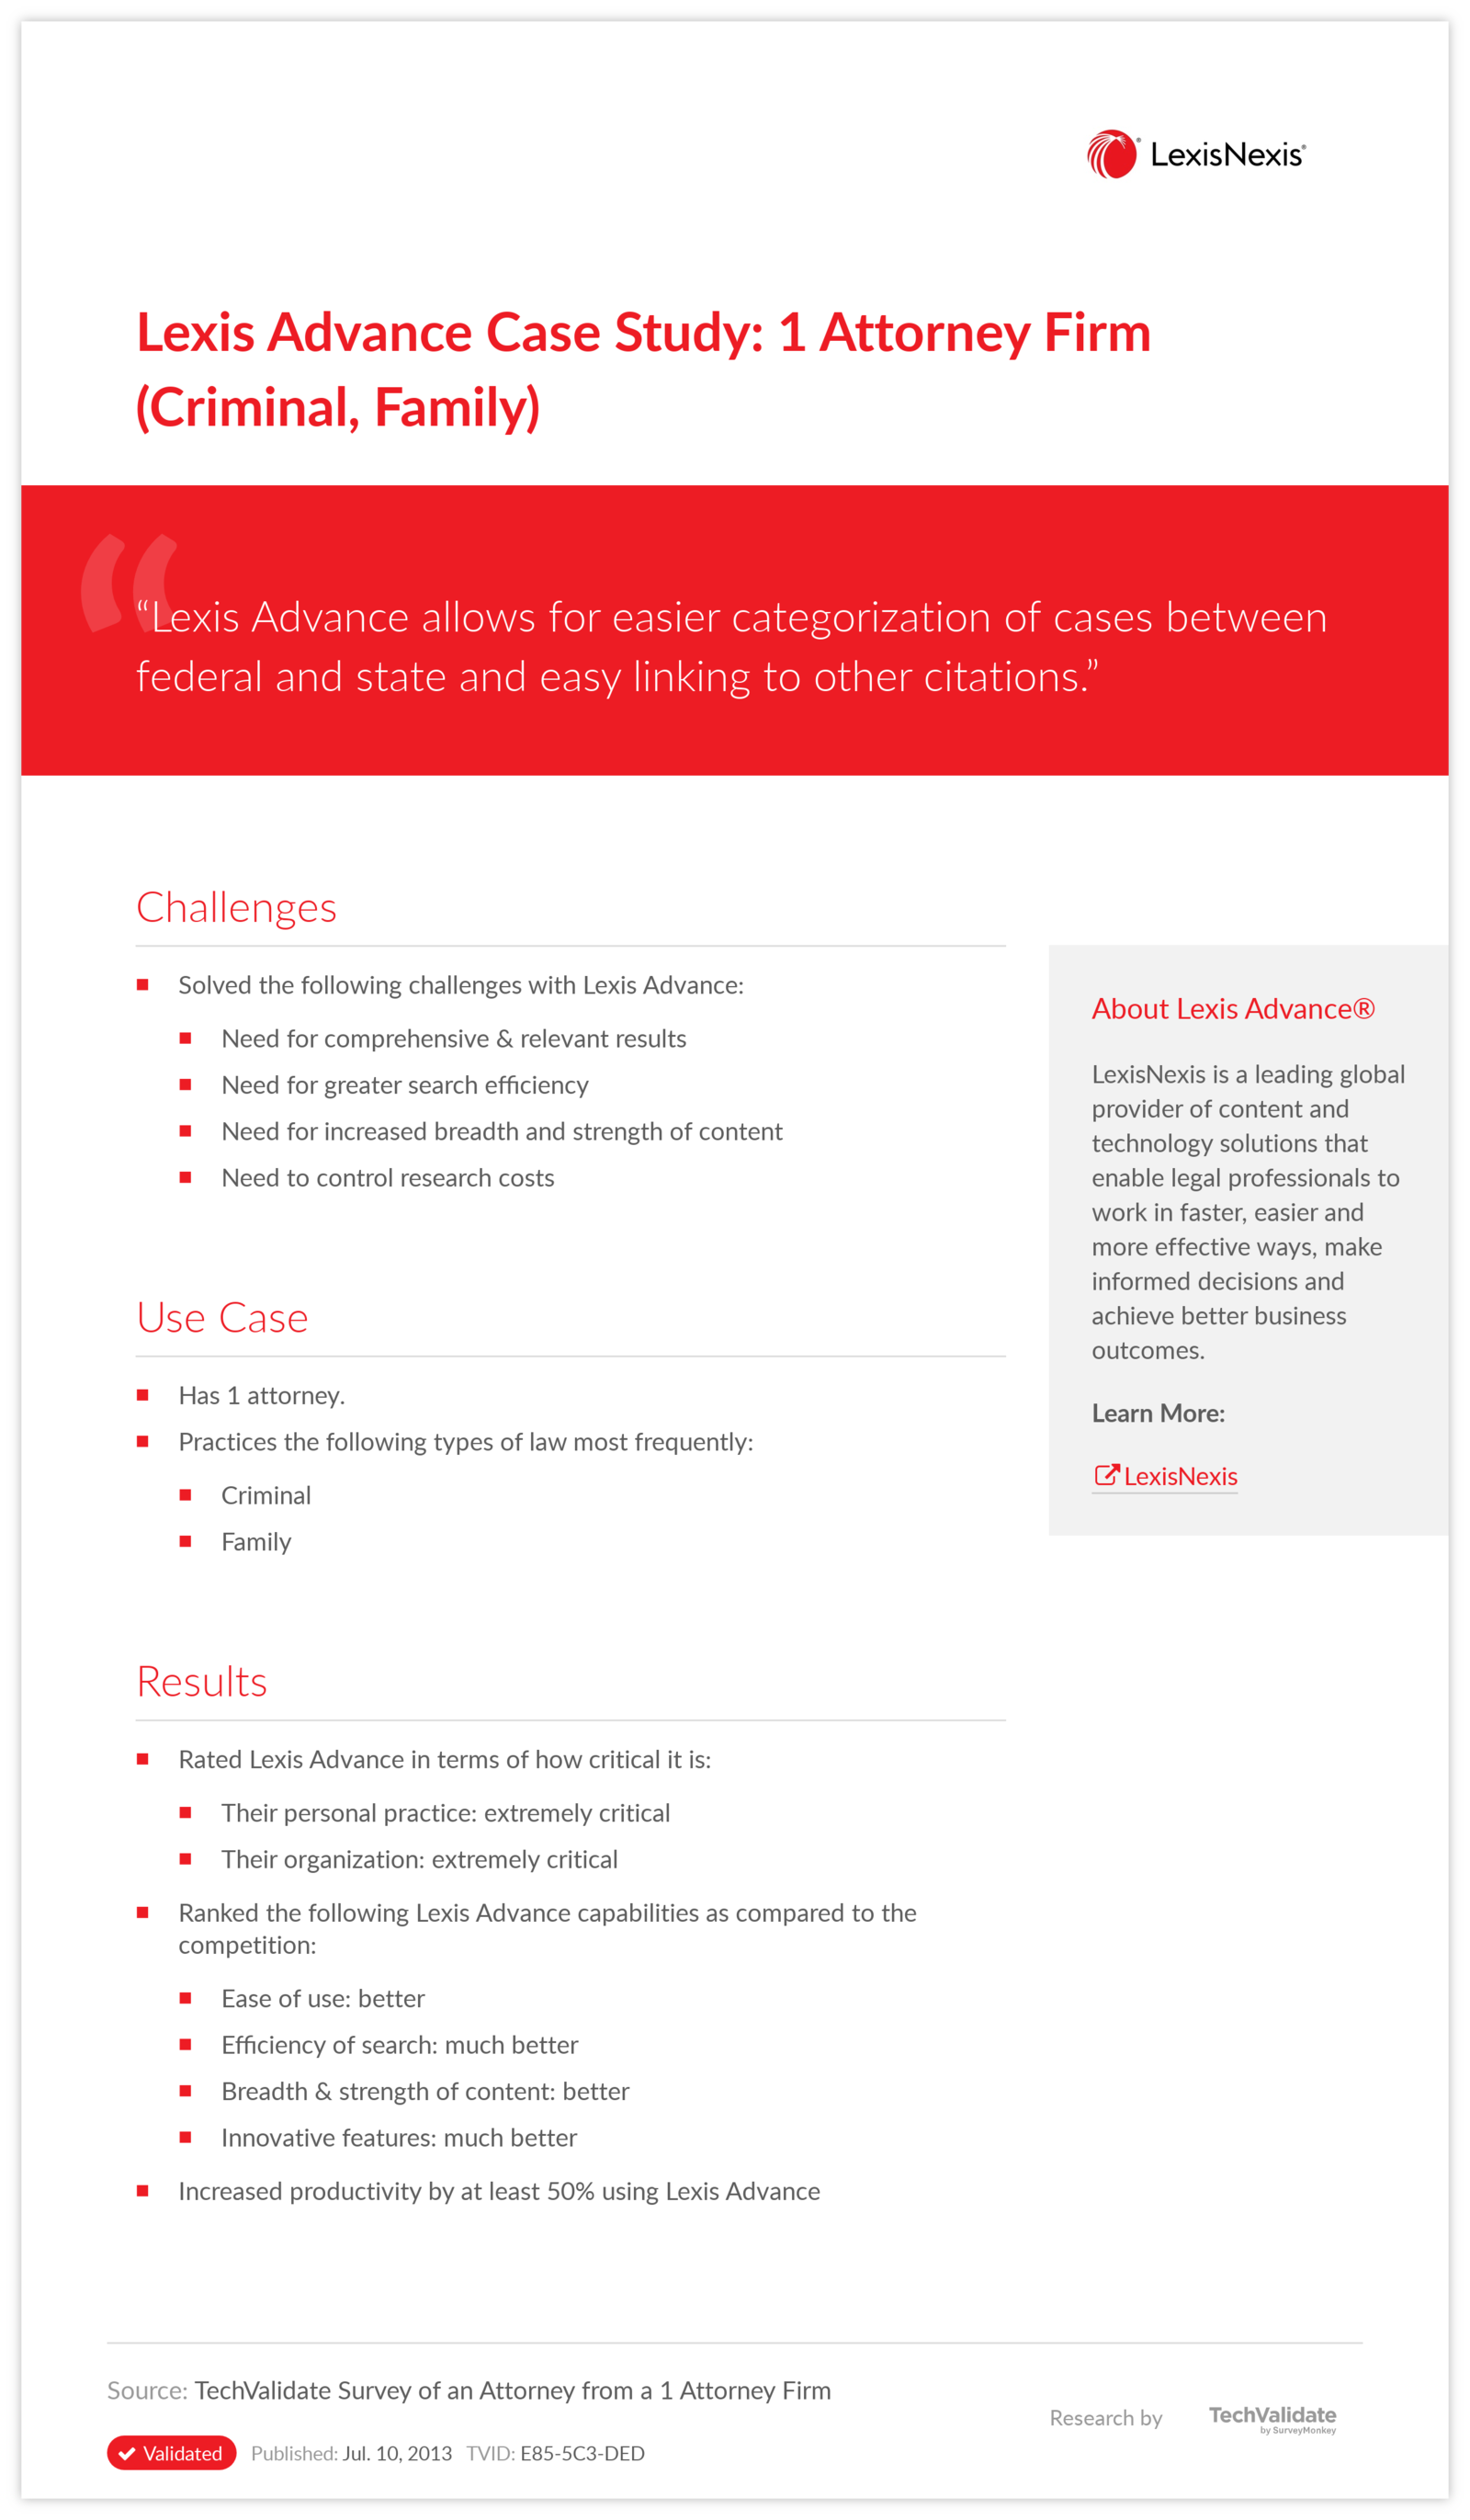 Lexis Advance Case Study: 1 Attorney Firm (Criminal, Family)